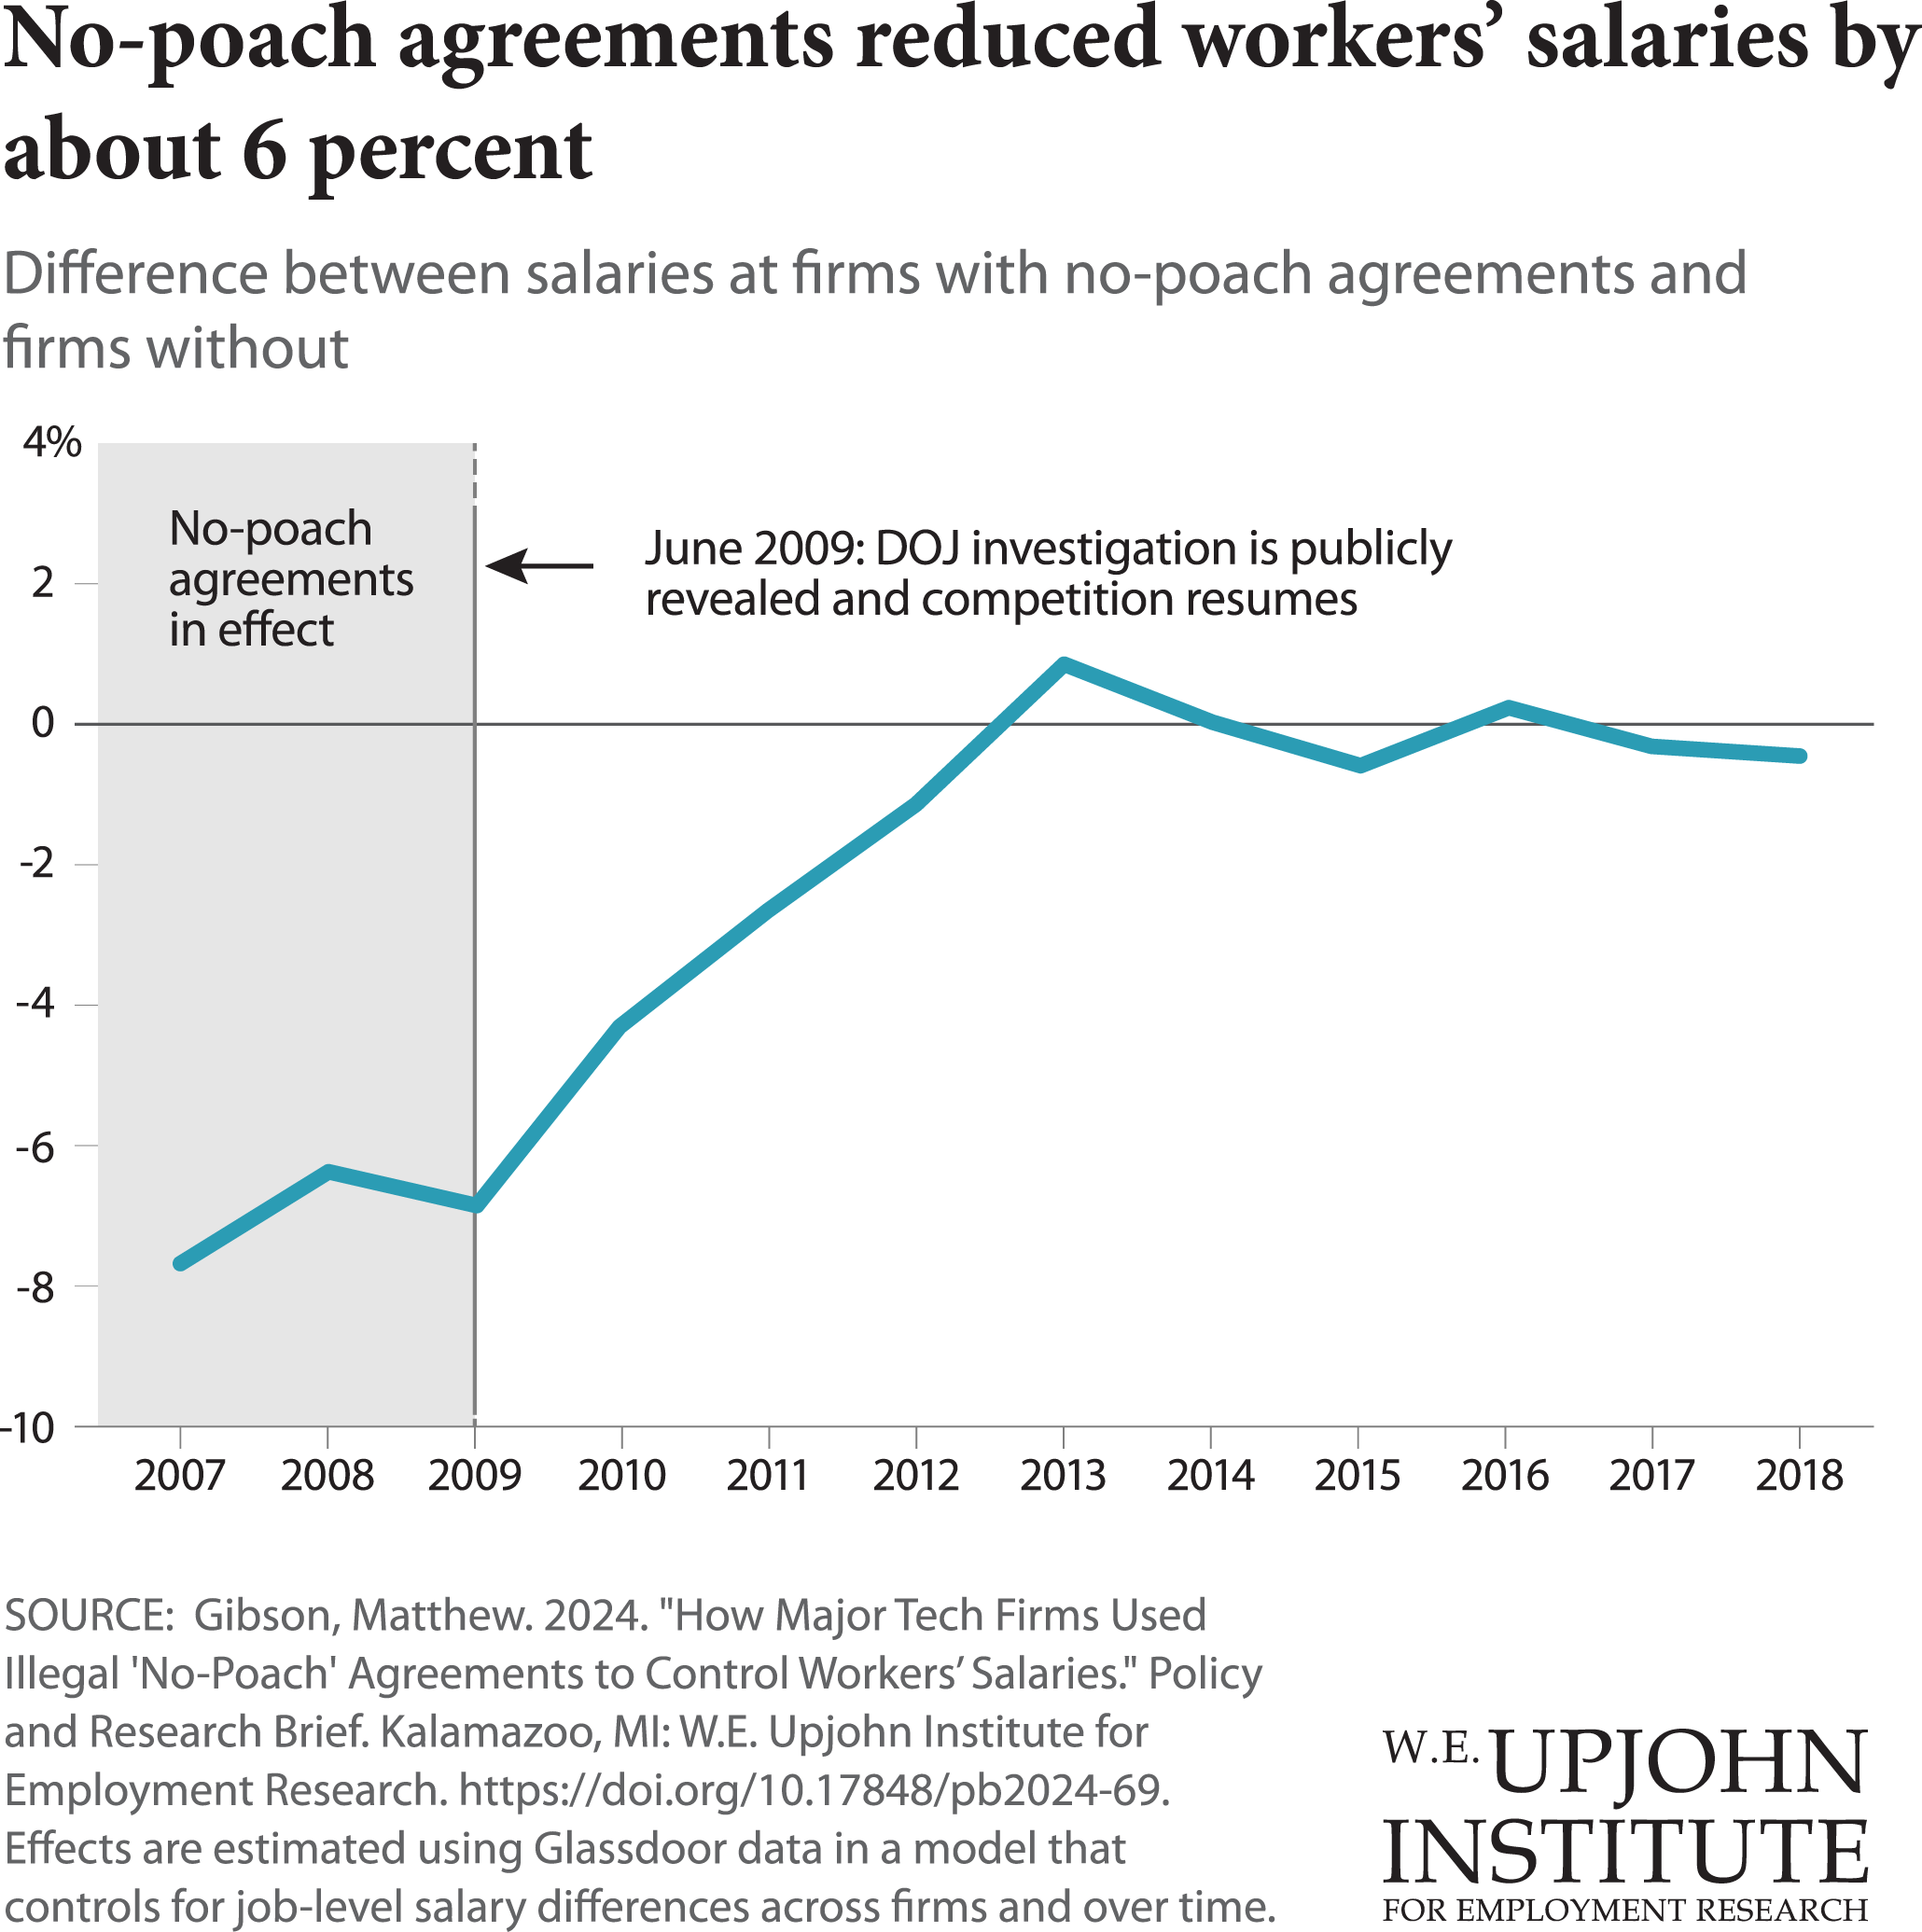 chart: no poach agreements reduced worker salaries about 6 percent